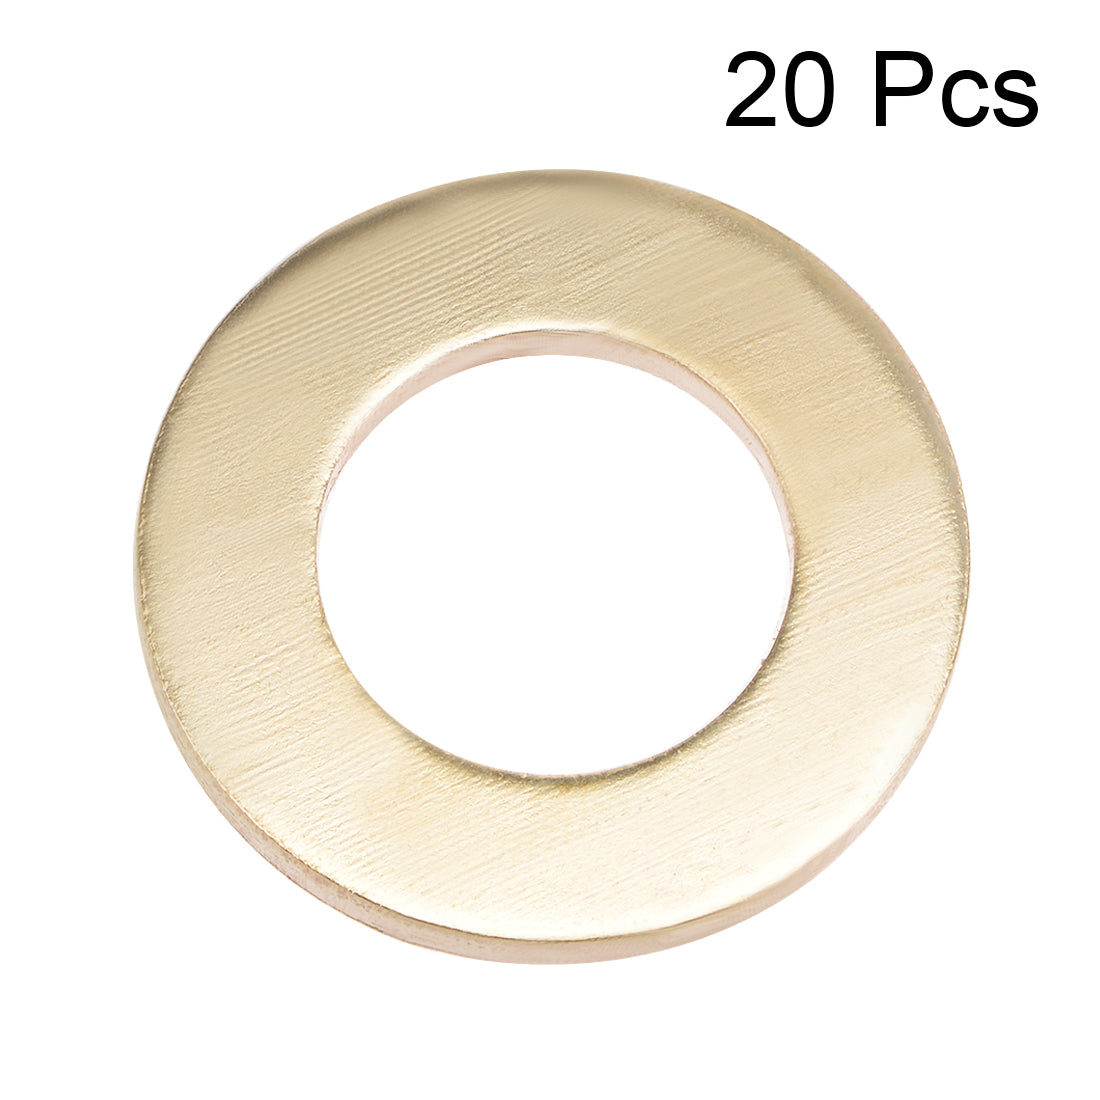 uxcell Uxcell 20Pcs 20.5mm x 36mm x 3mm Copper Flat Washer for Screw Bolt